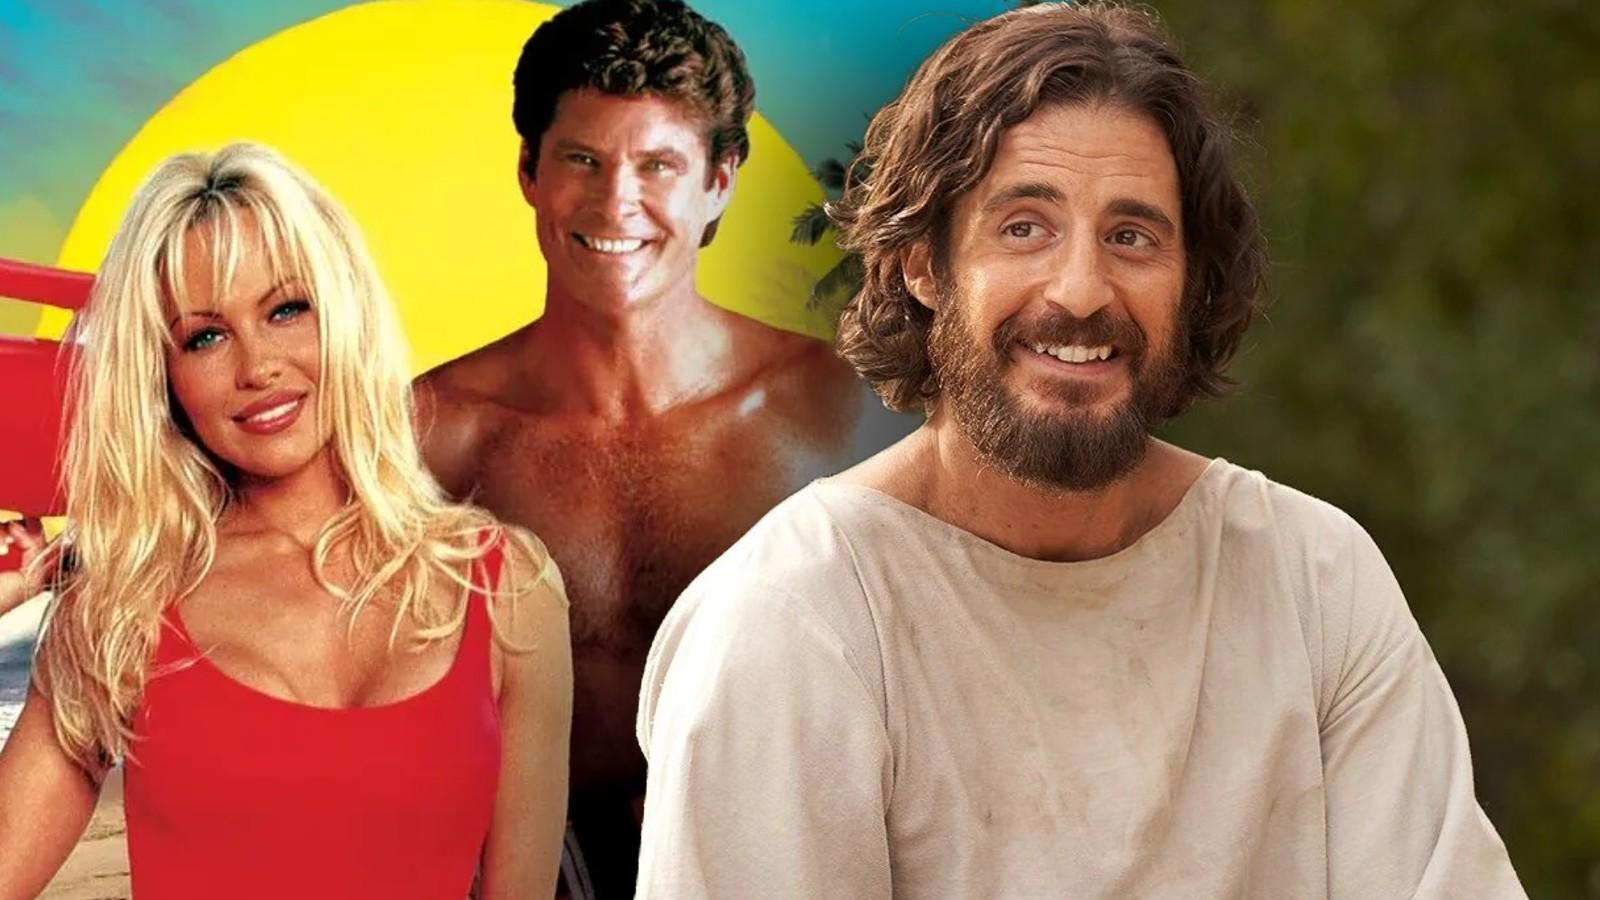 Pamela Anderson and David Hasselhoff in Baywatch and Jonathan Roumie in The Chosen